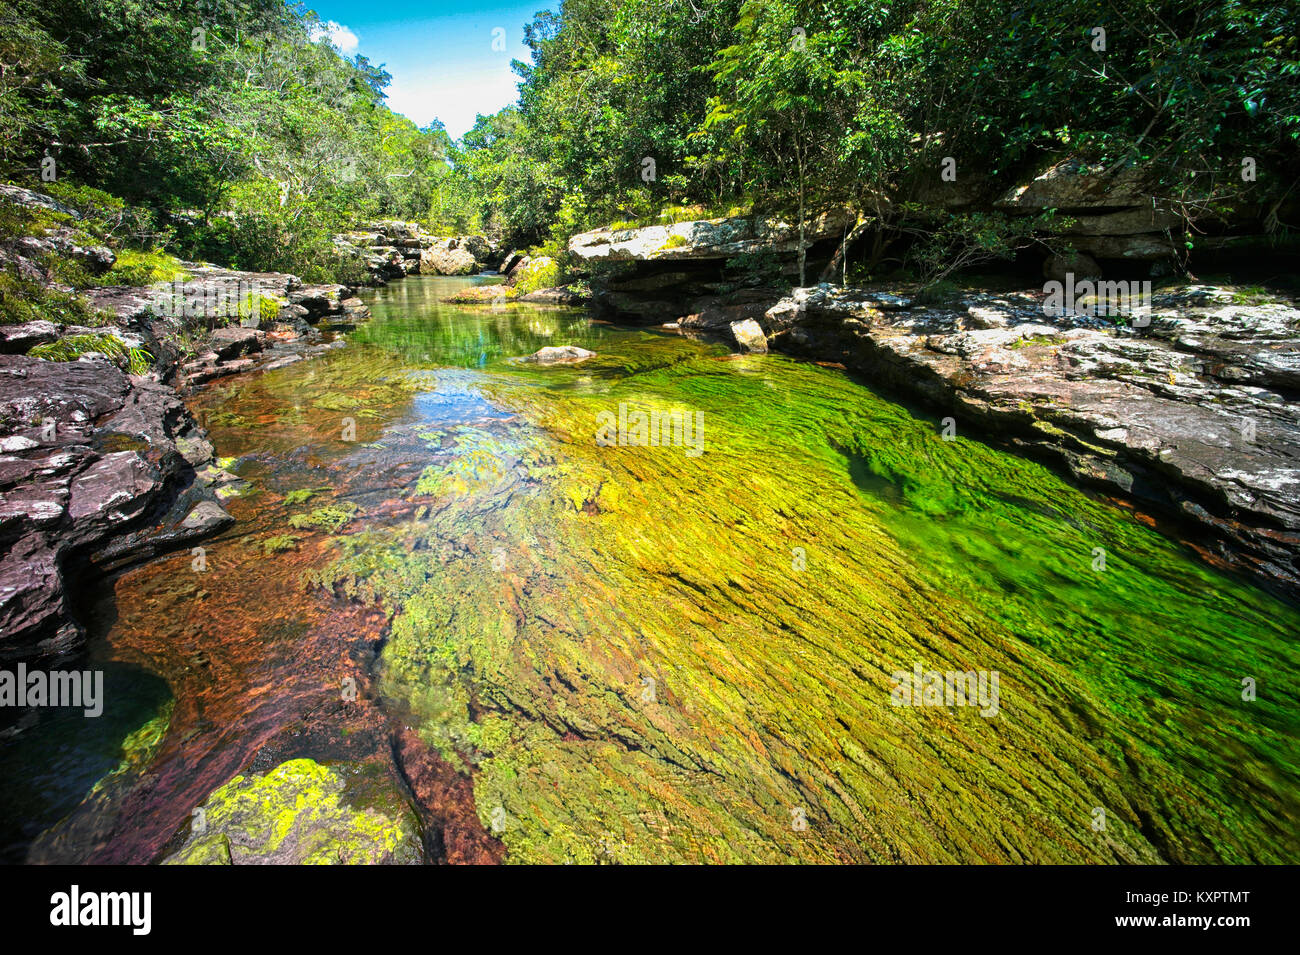 Colorful endemic freshwater plants known as macarenia clavigera create colorful natural tapestries at Cristales Selva in Cano Cristales river, commonl Stock Photo